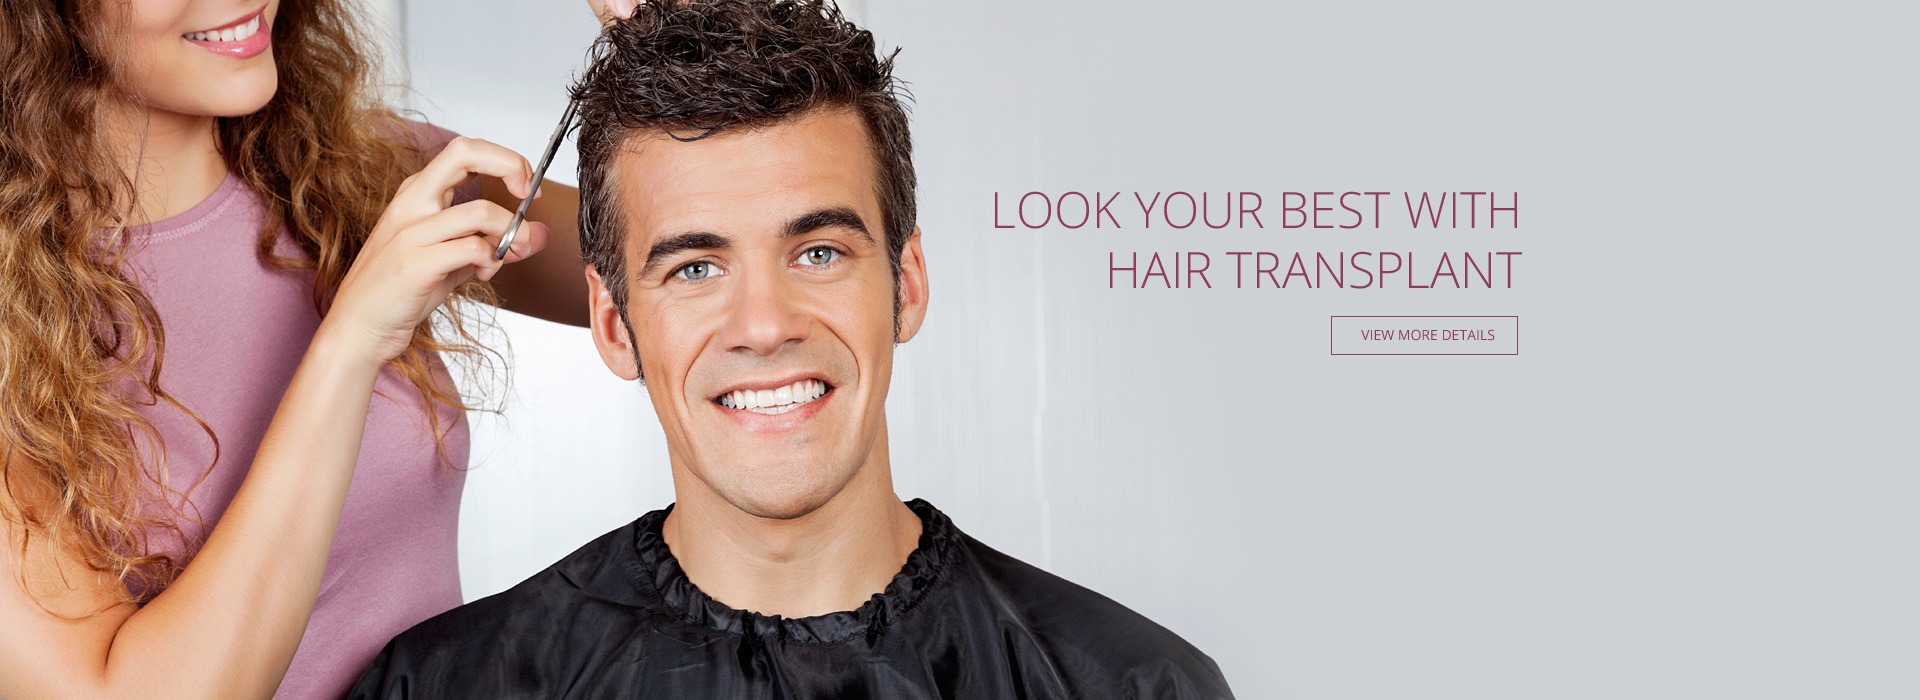 Look your best with hair transplant